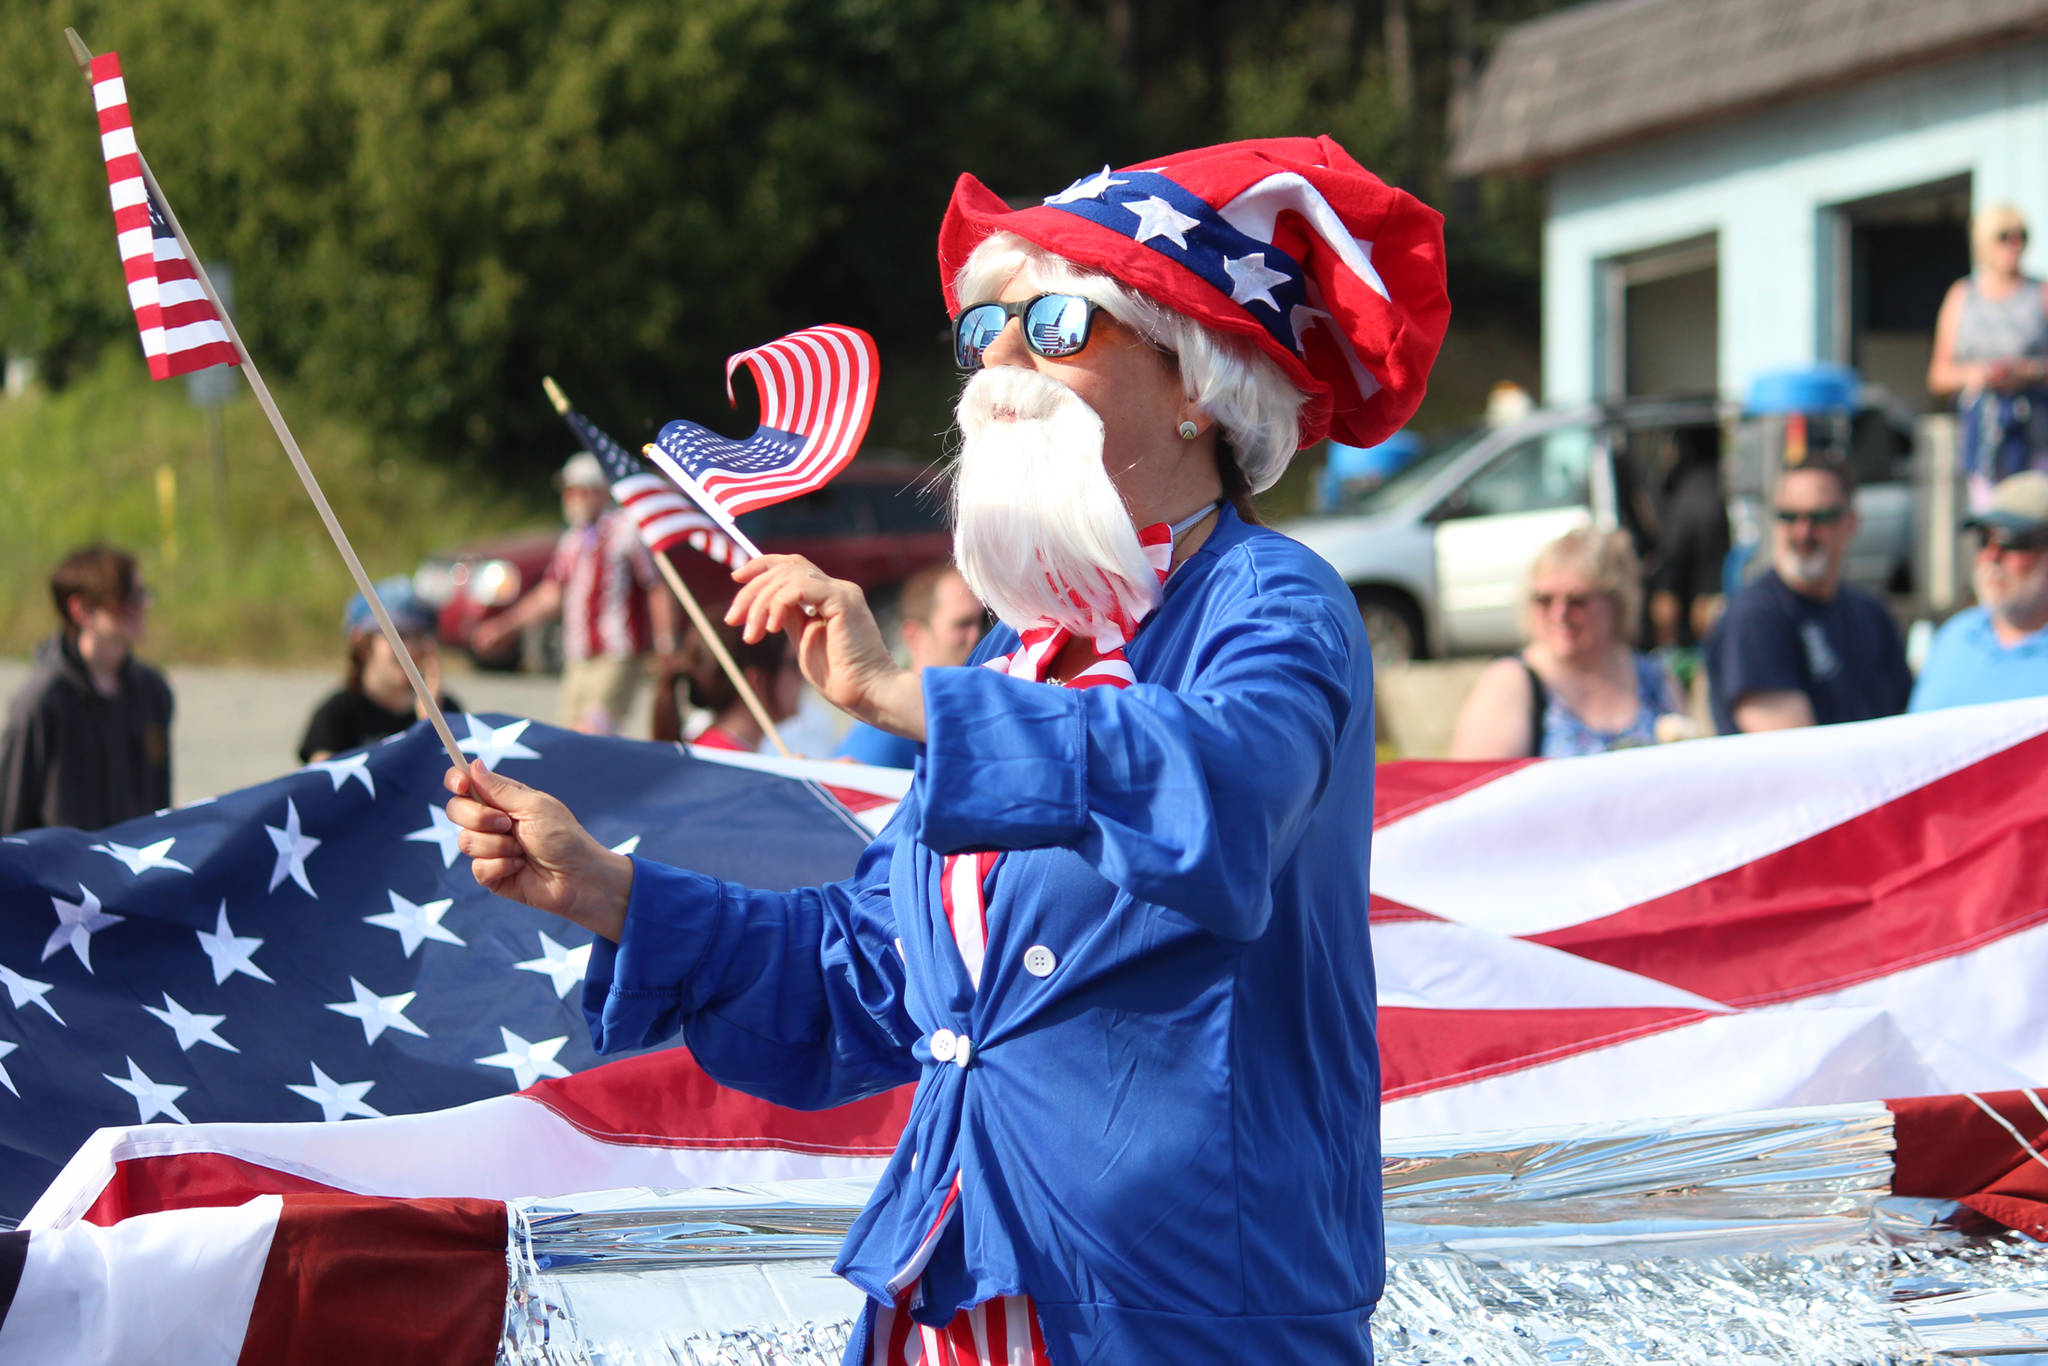 A member of the Homer Senior Citizens Center float marches in the July Fourth parade on Thursday, July 4, 2019 on Pioneer Avenue in Homer, Alaska. (Photo by Megan Pacer/Homer News)